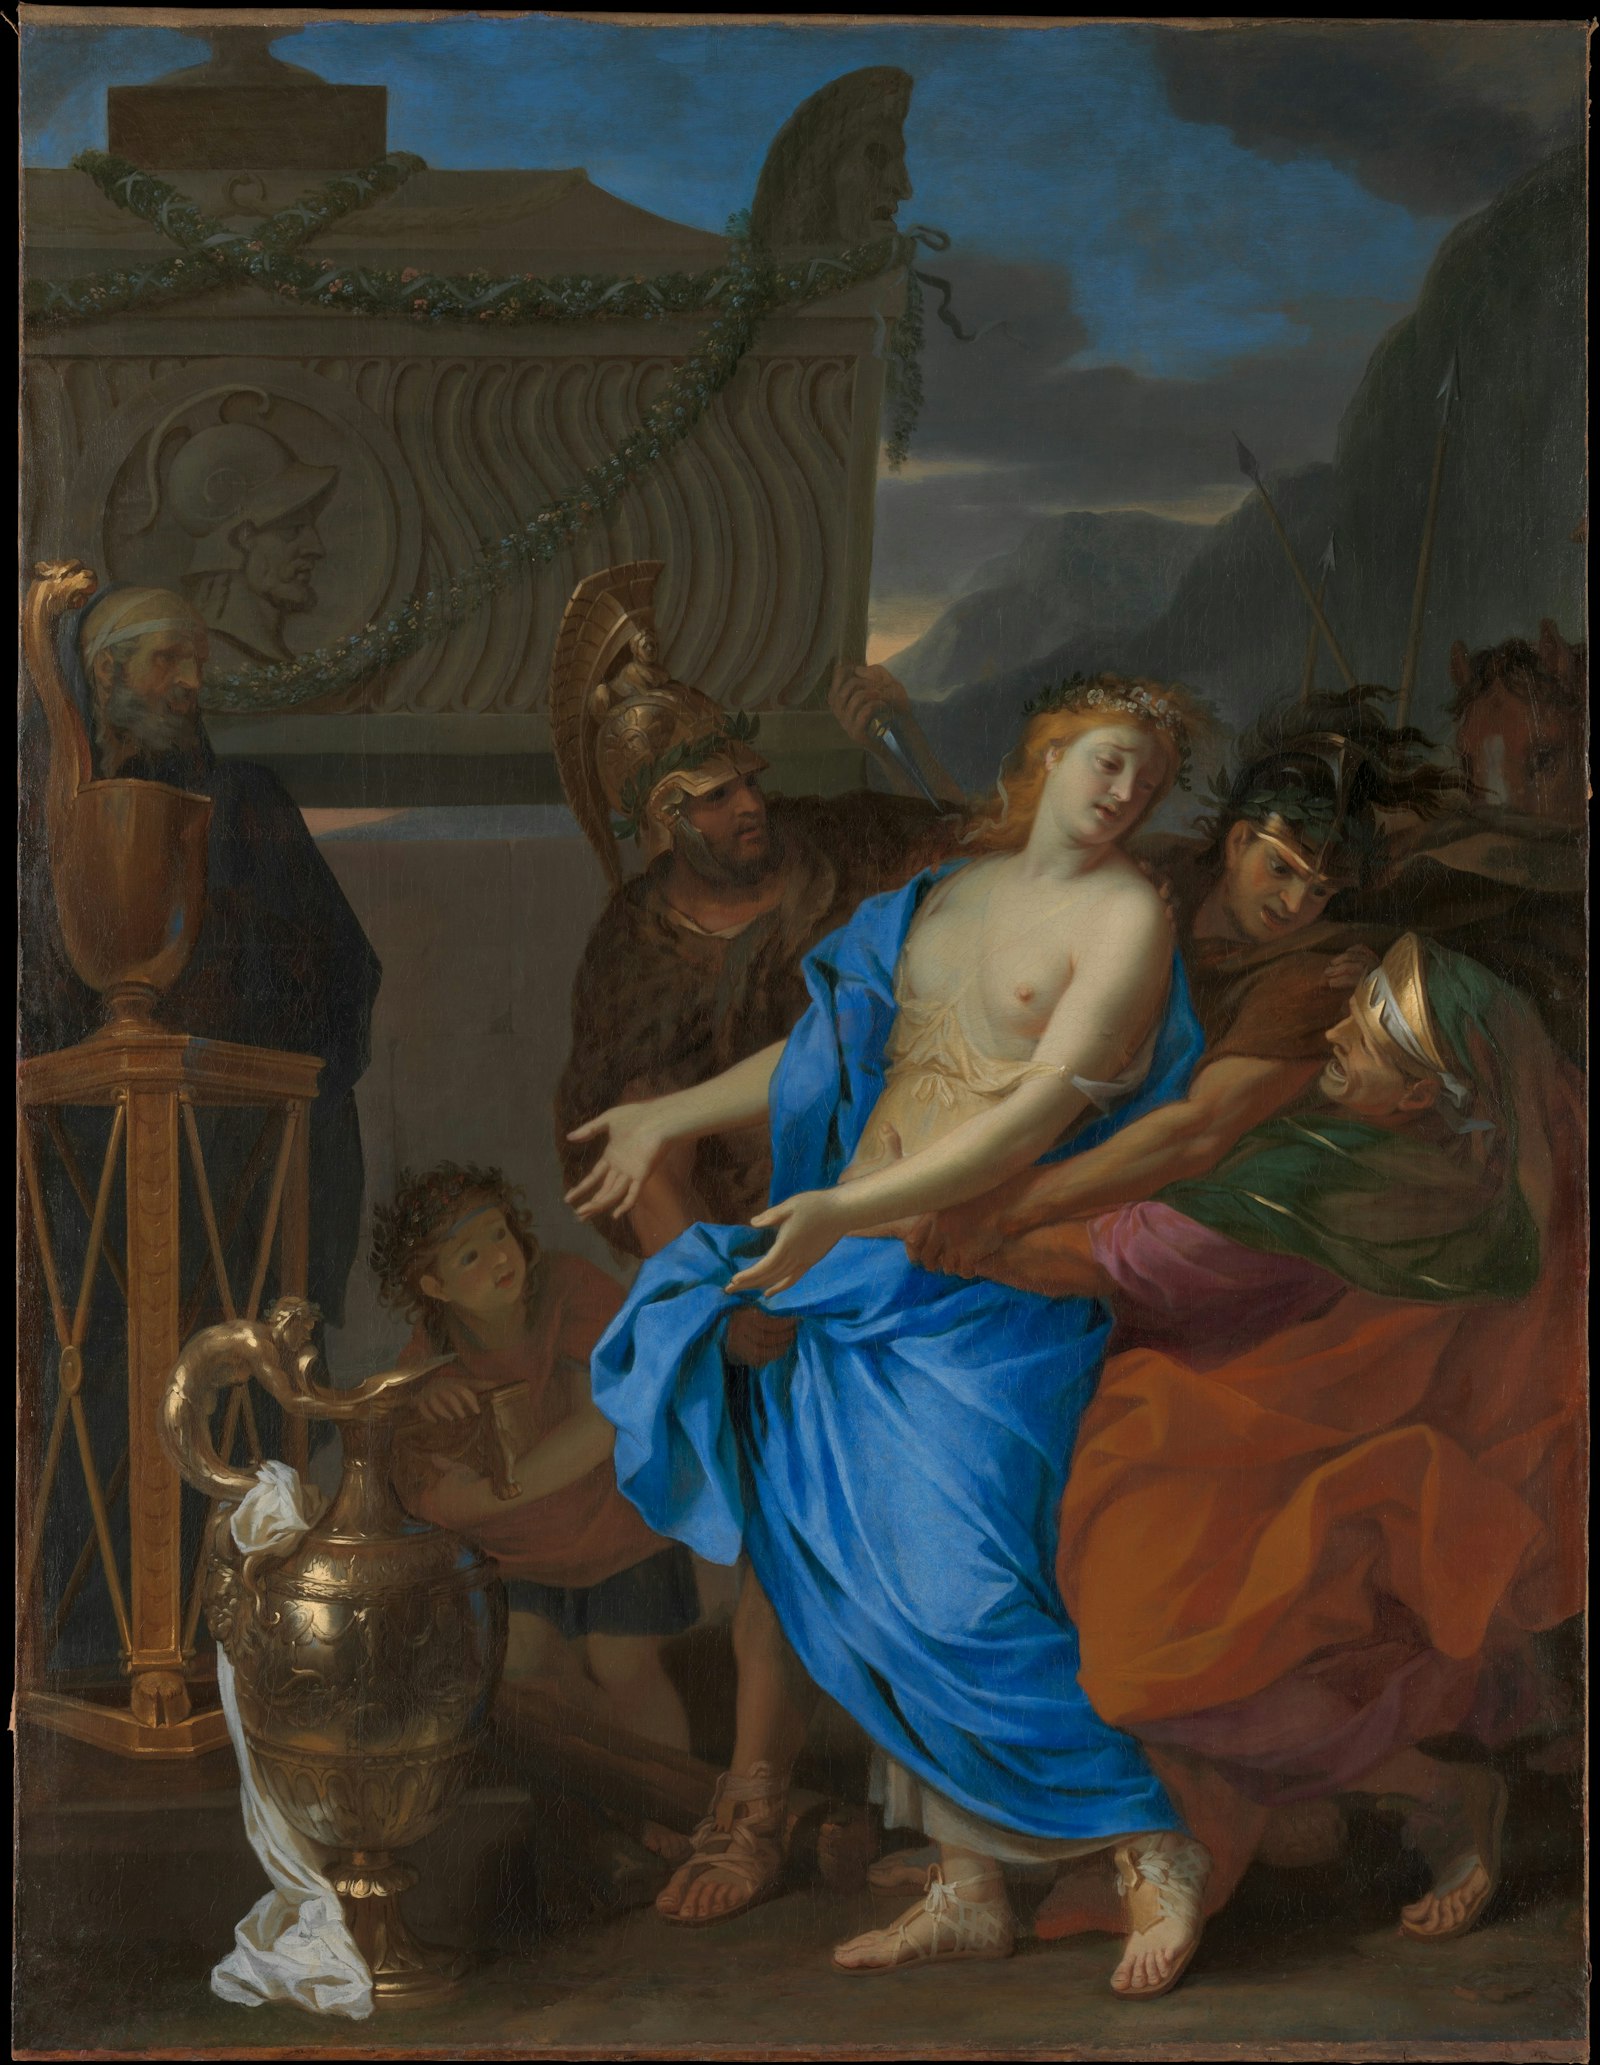 The Sacrifice of Polyxena painting by Charles Le Brun, 1647